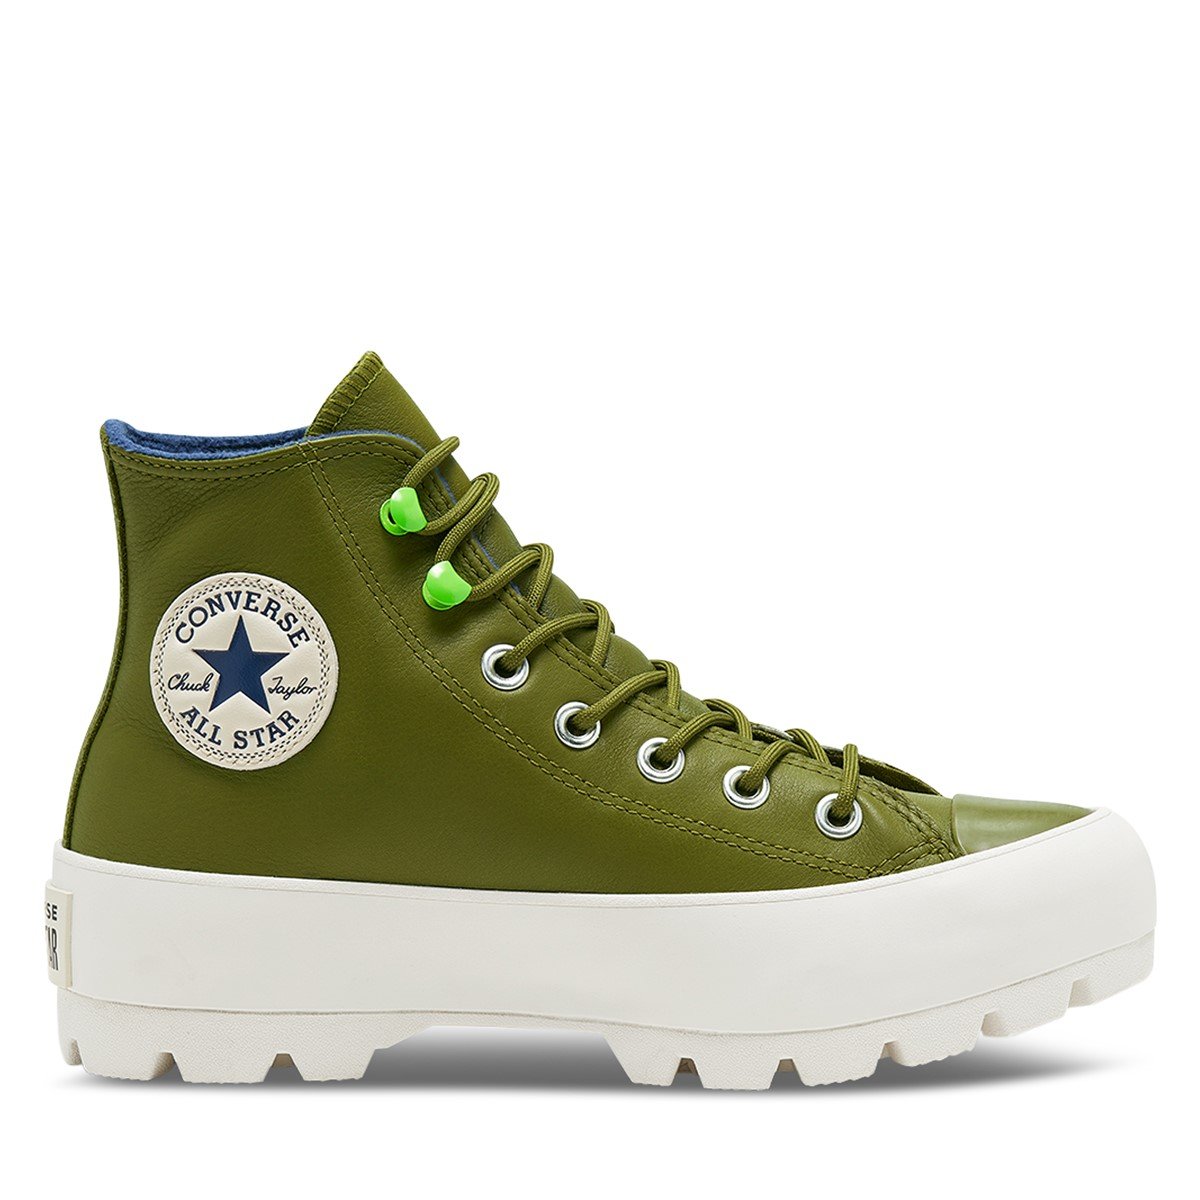 Women's Chuck Taylor All Star GORE-TEX Lugged Sneaker Boots in Khaki